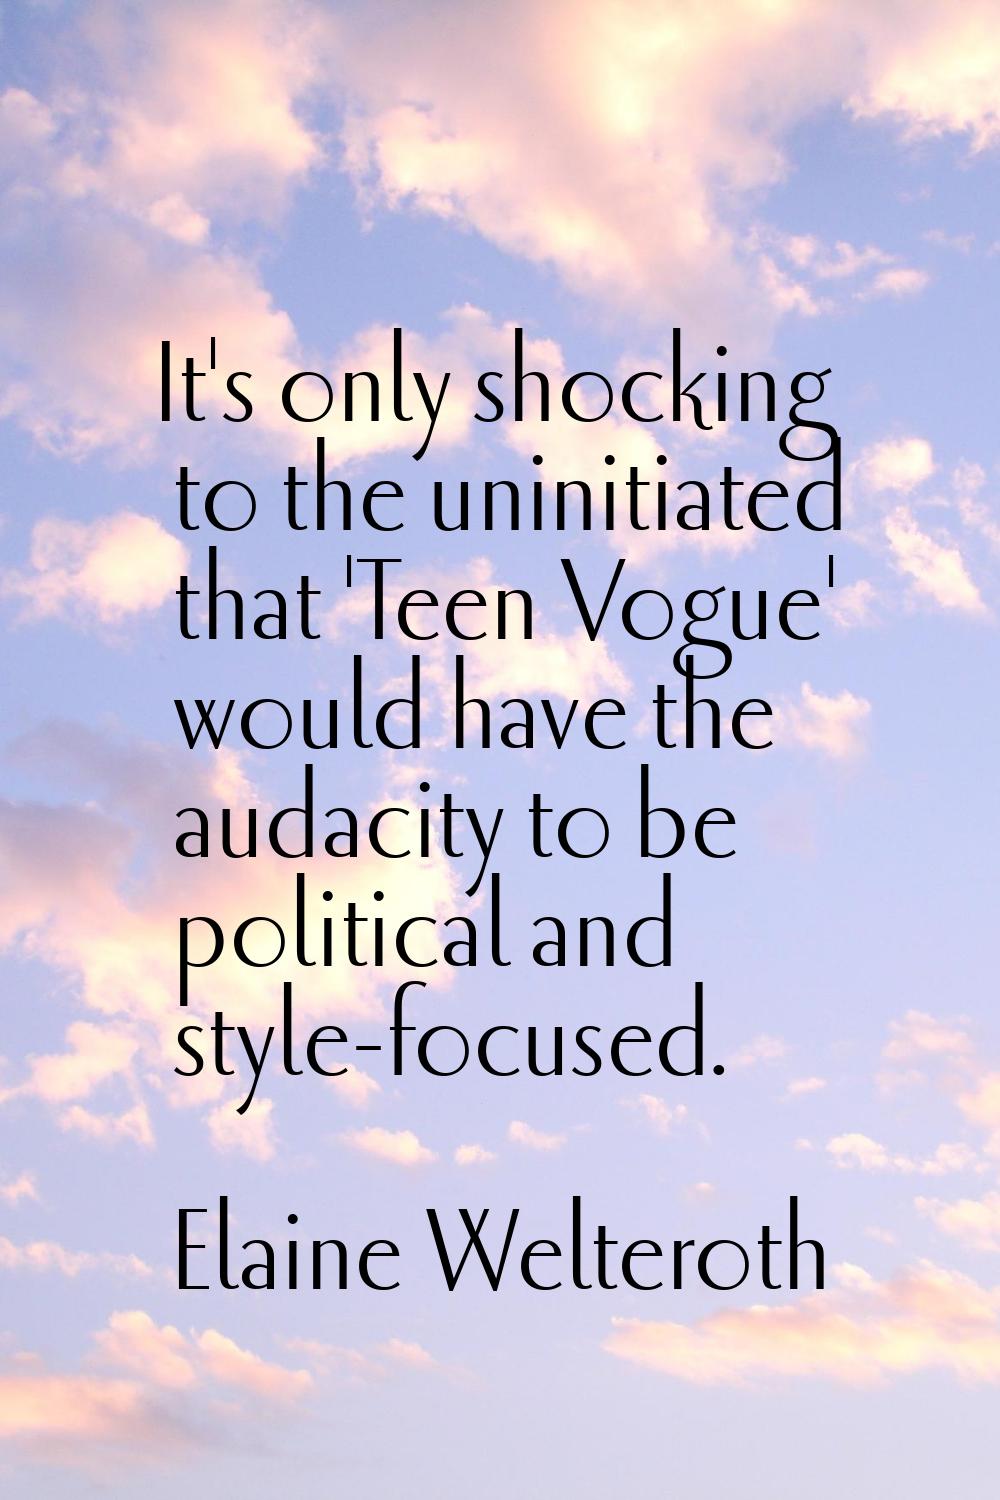 It's only shocking to the uninitiated that 'Teen Vogue' would have the audacity to be political and